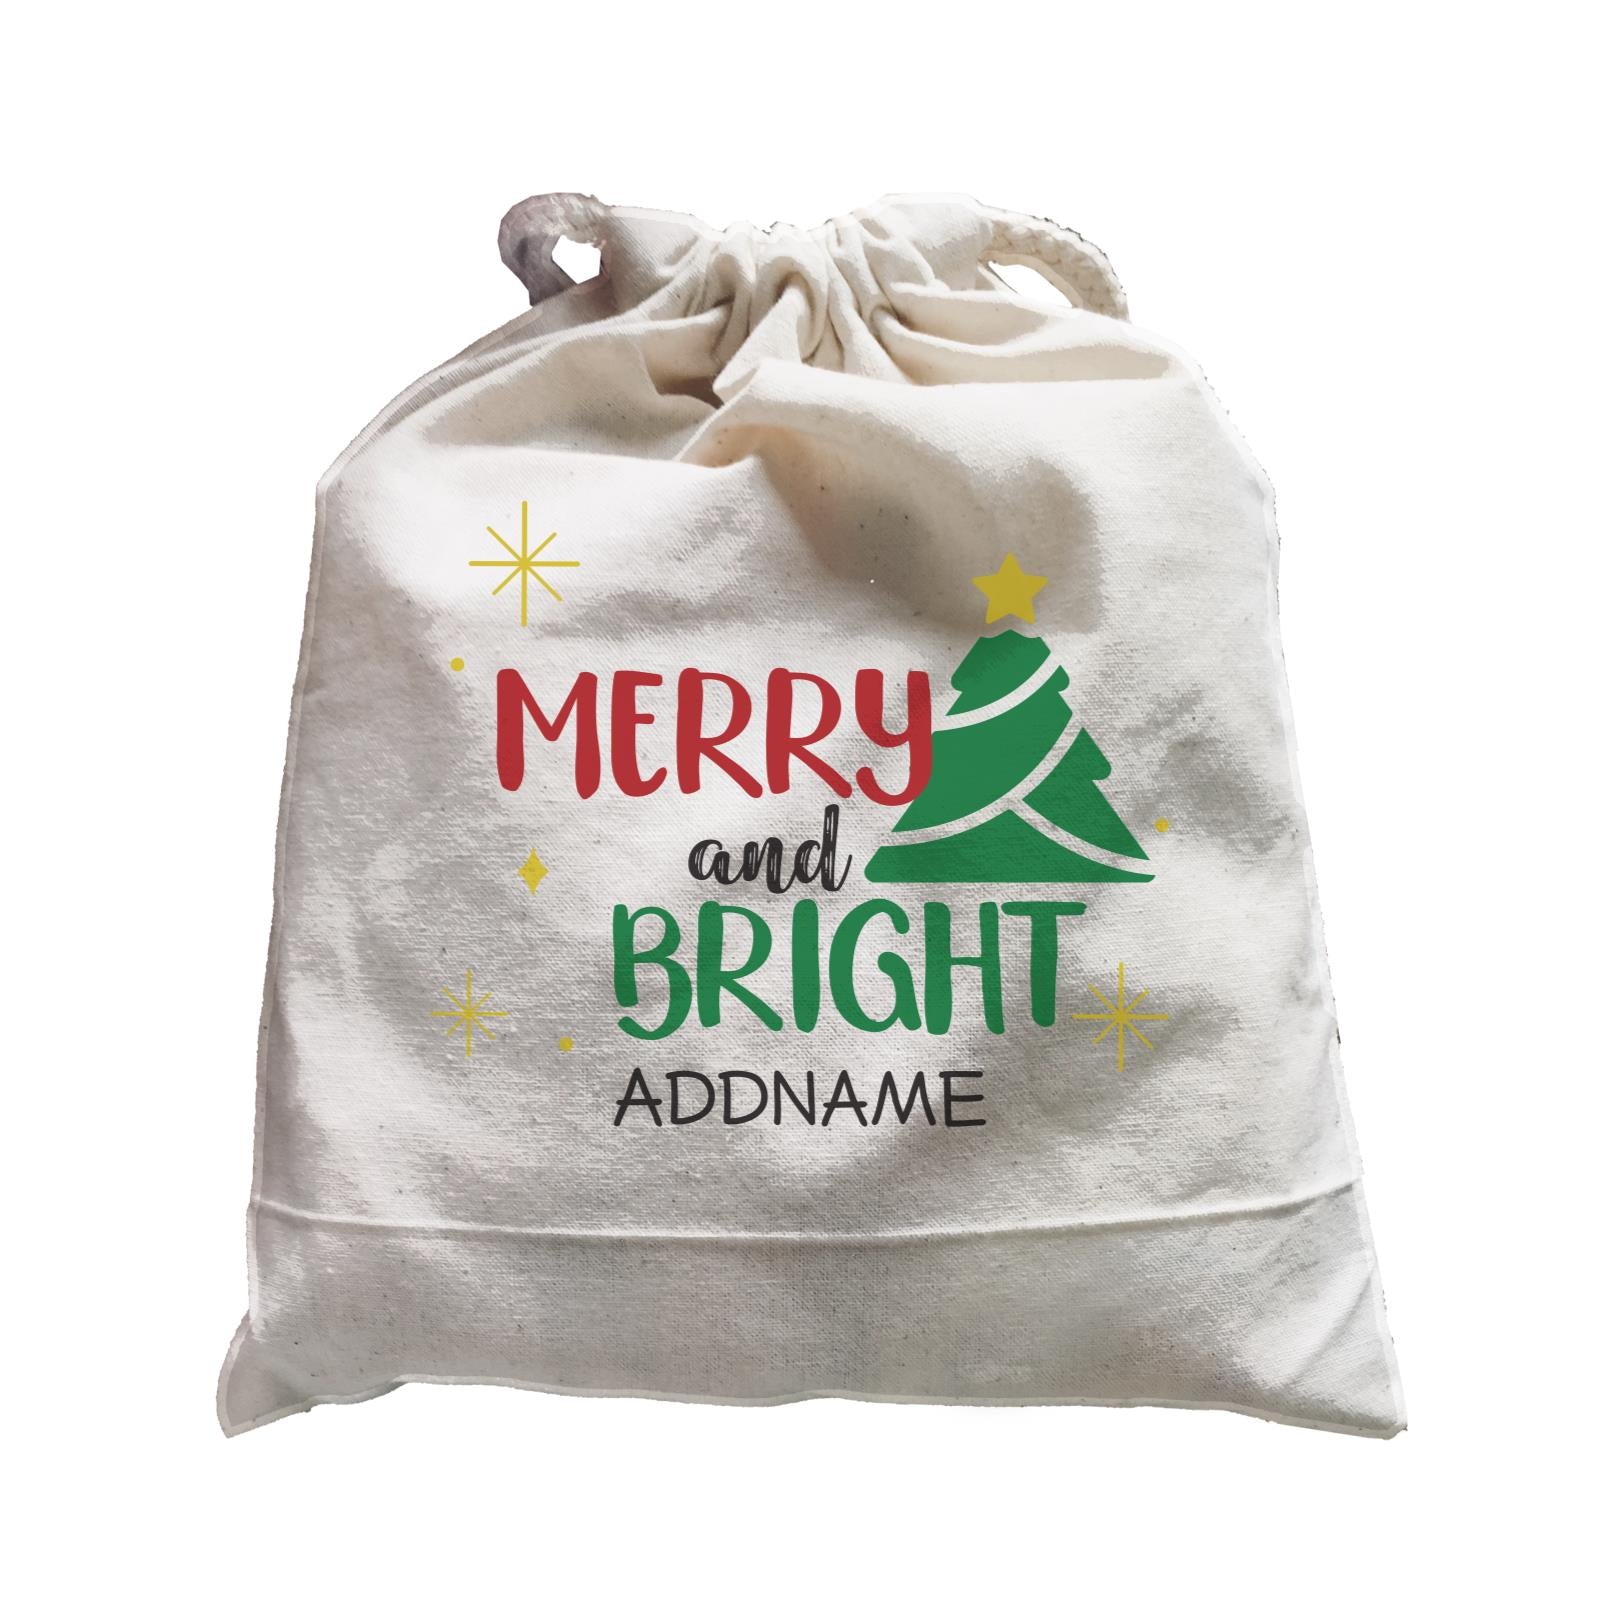 Xmas Merry and Bright with Christmas Tree Satchel